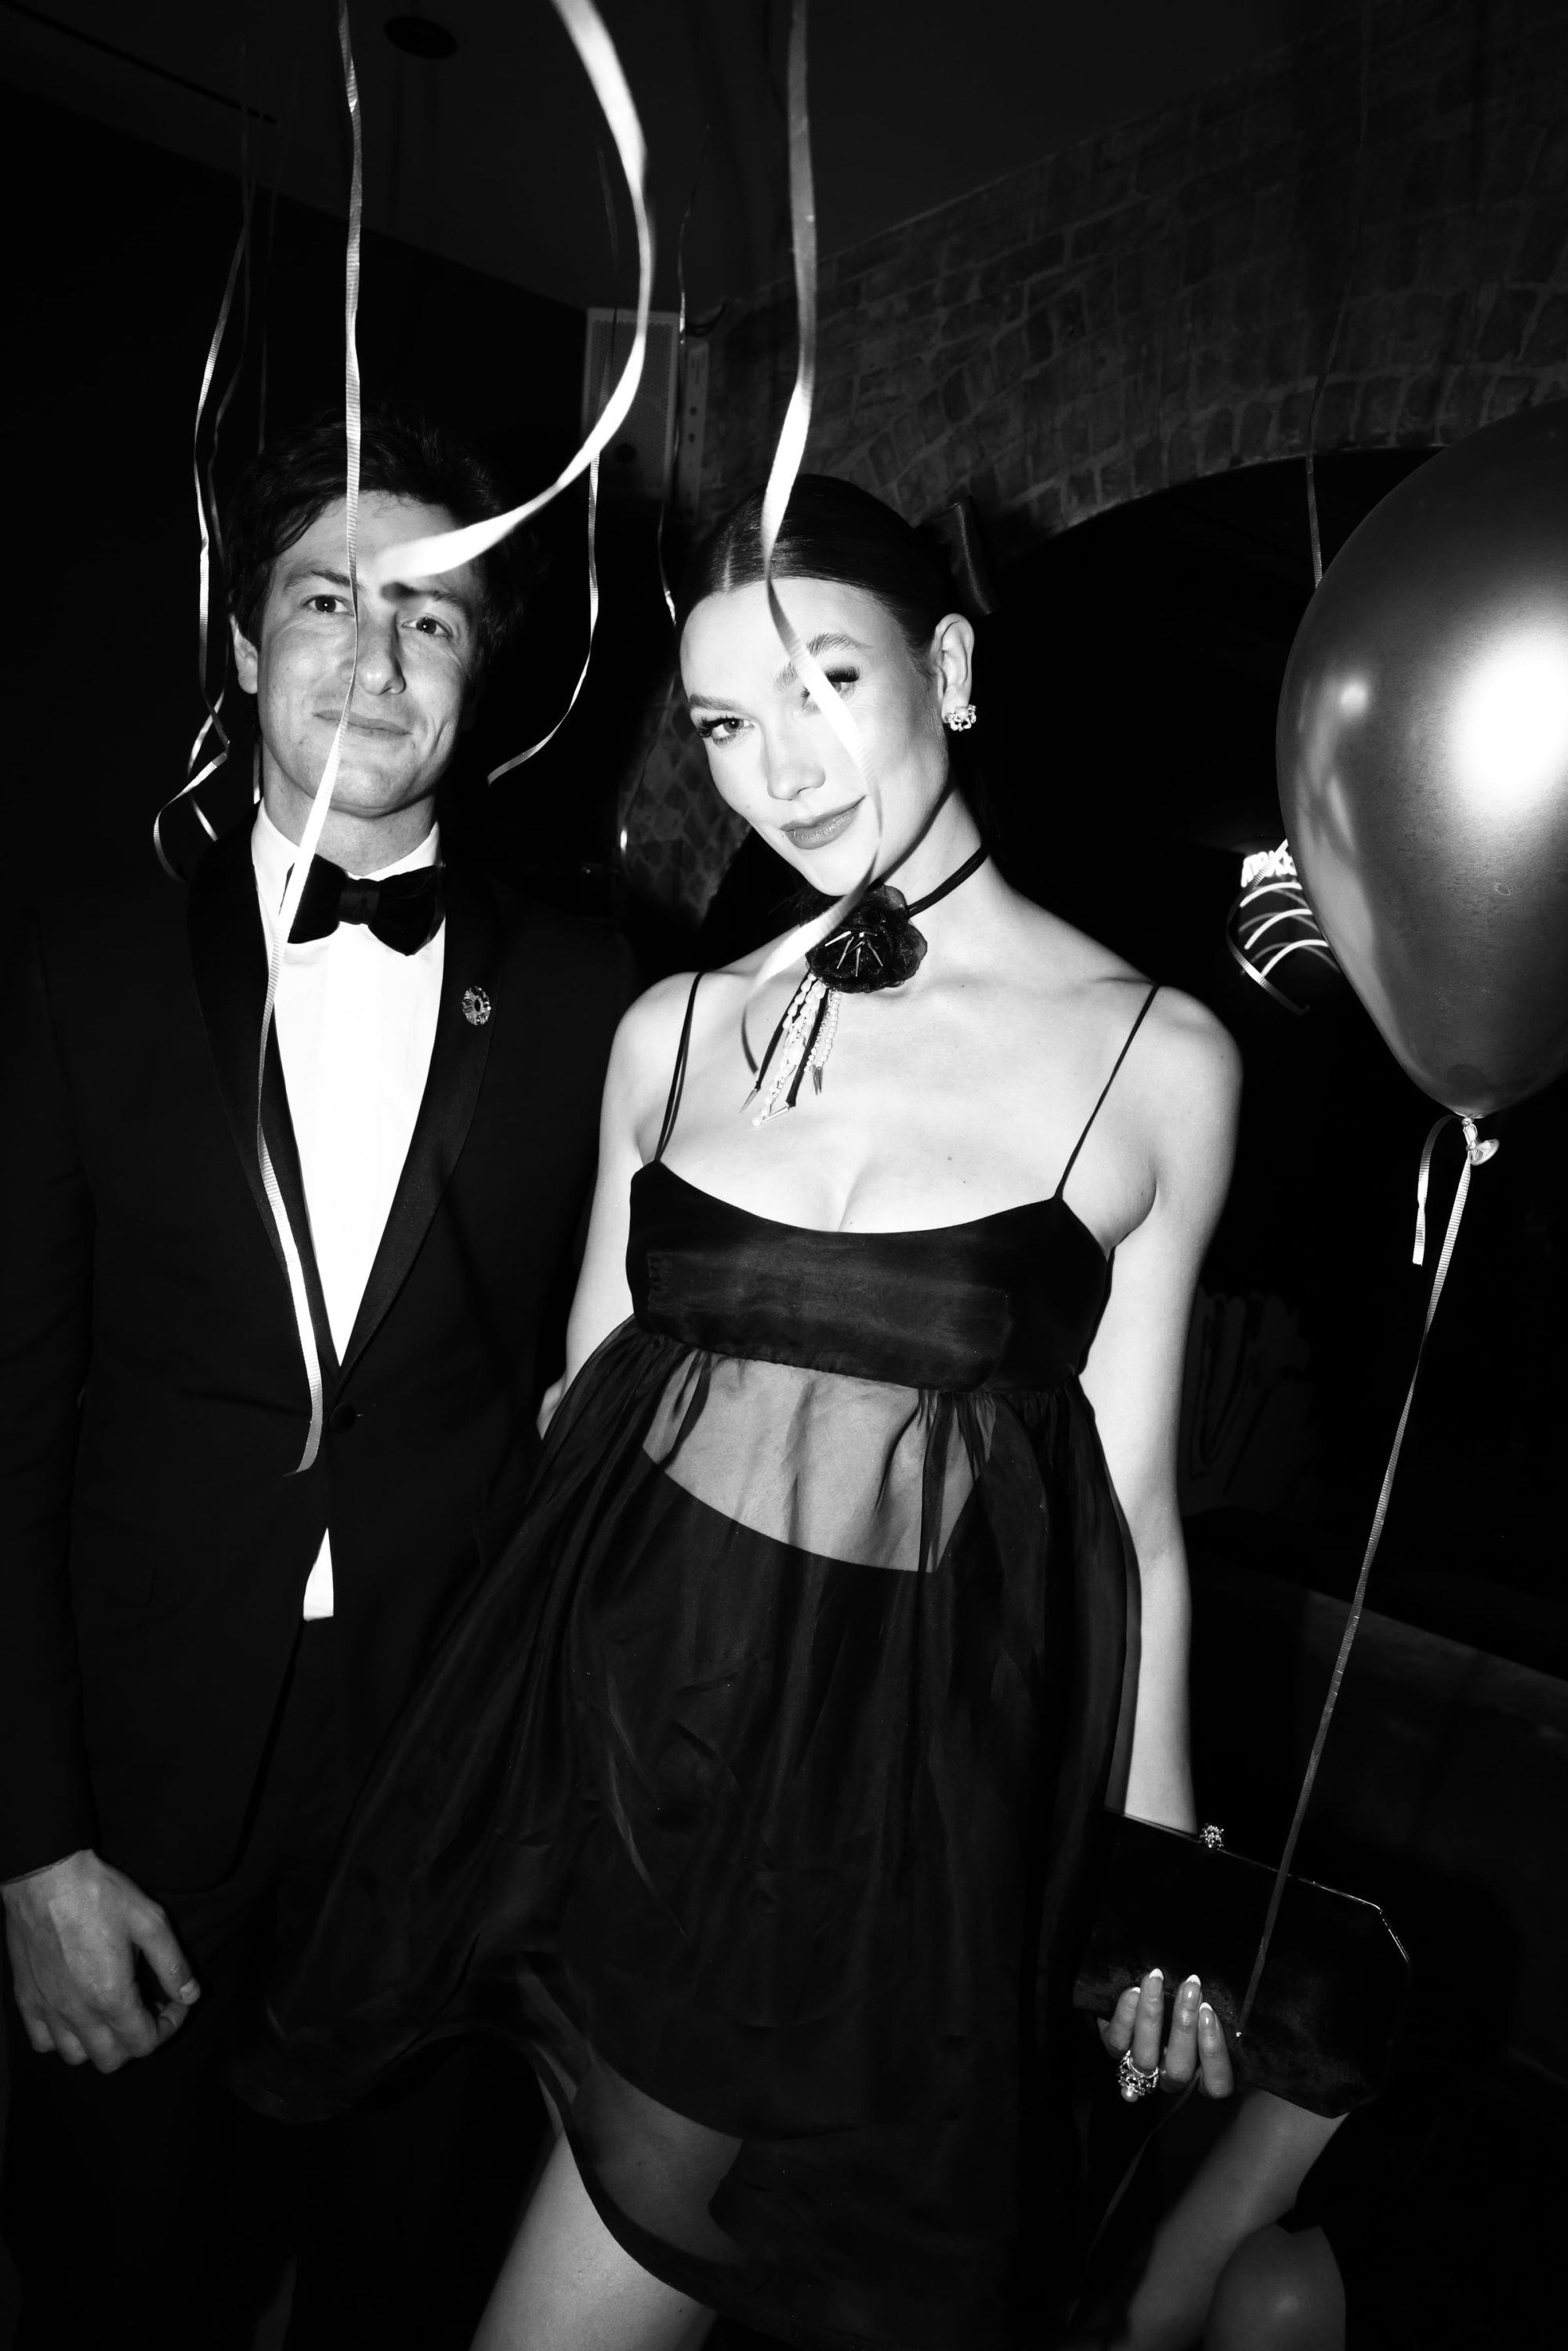 Inside the star-studded Met Gala 2023 after parties